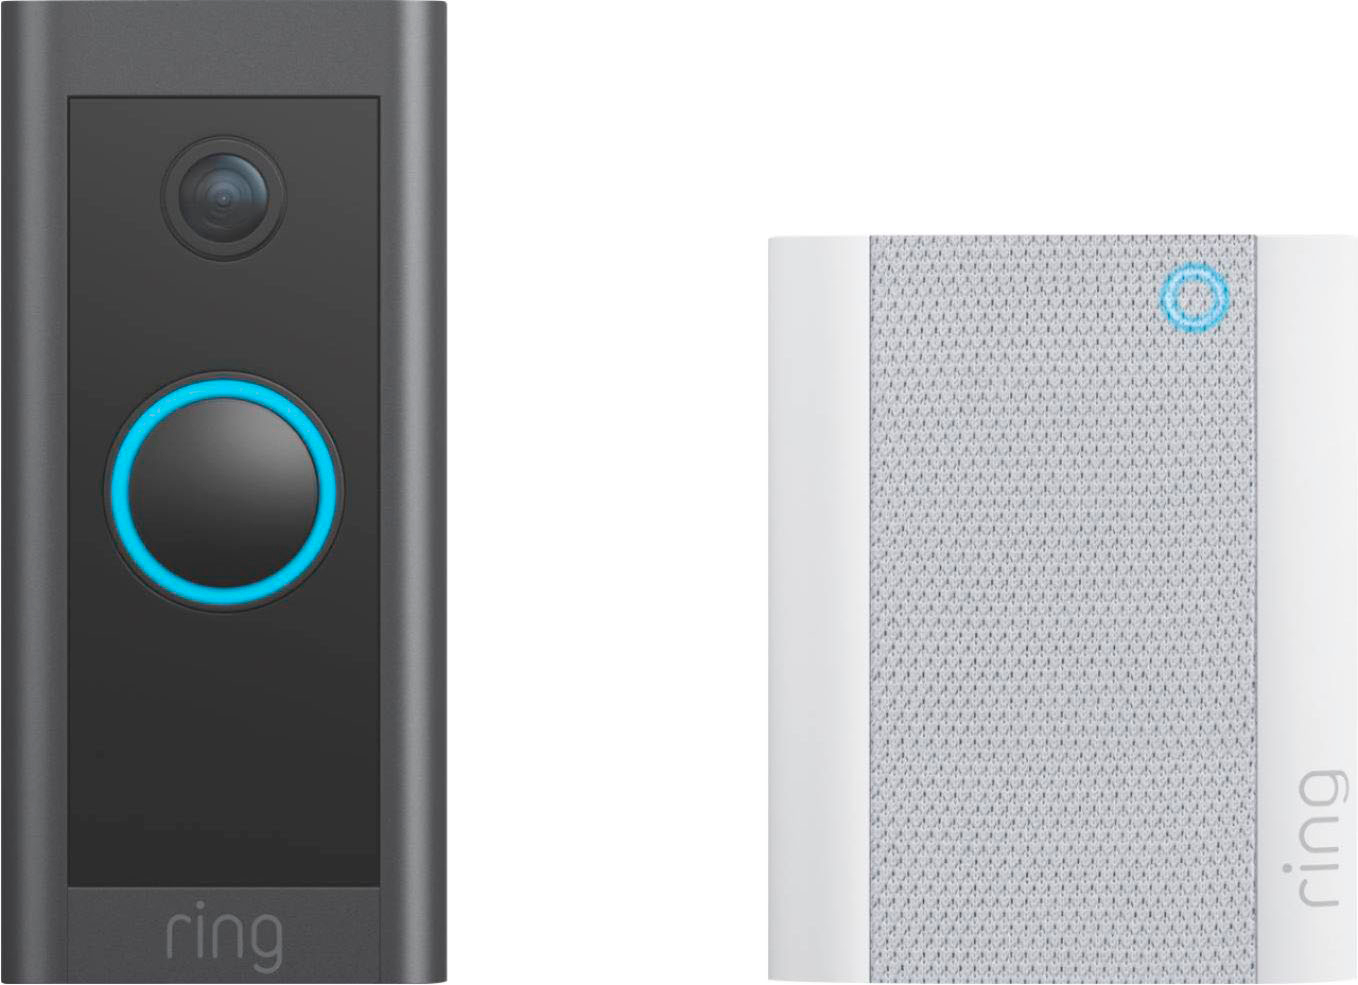 Ring Wi-Fi Smart Video Doorbell Wired with Chime Black B09NLDYGHQ - Best Buy